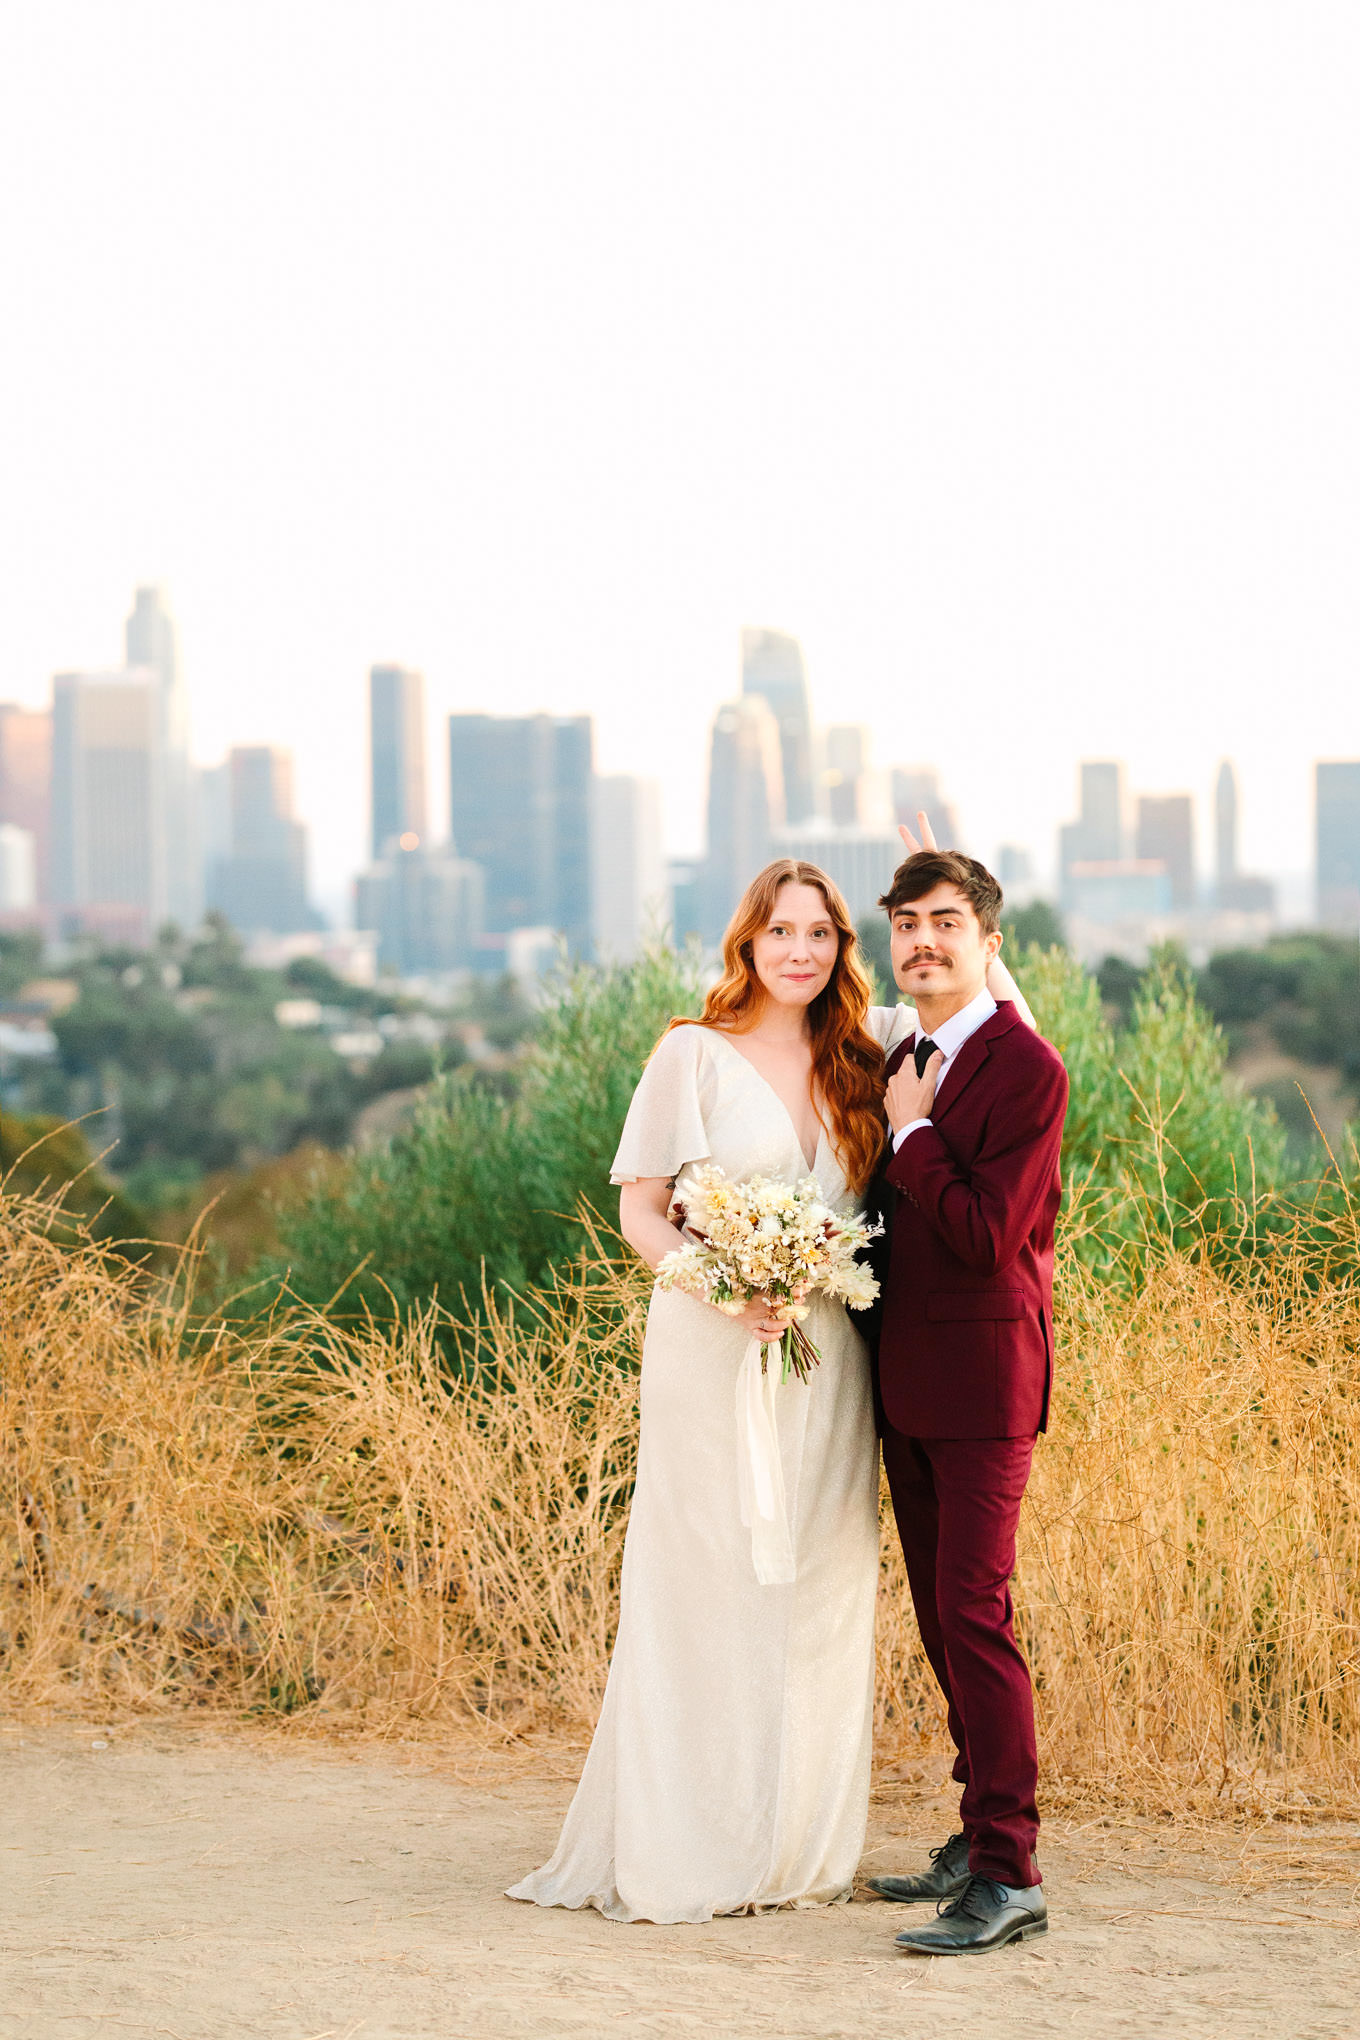 Playful couple giving bunny ears in front of LA skyline | Los Angeles Elysian Park Elopement | Colorful and elevated wedding photography for fun-loving couples in Southern California | #LosAngelesElopement #elopement #LAarboretum #LAskyline #elopementphotos   Source: Mary Costa Photography | Los Angeles